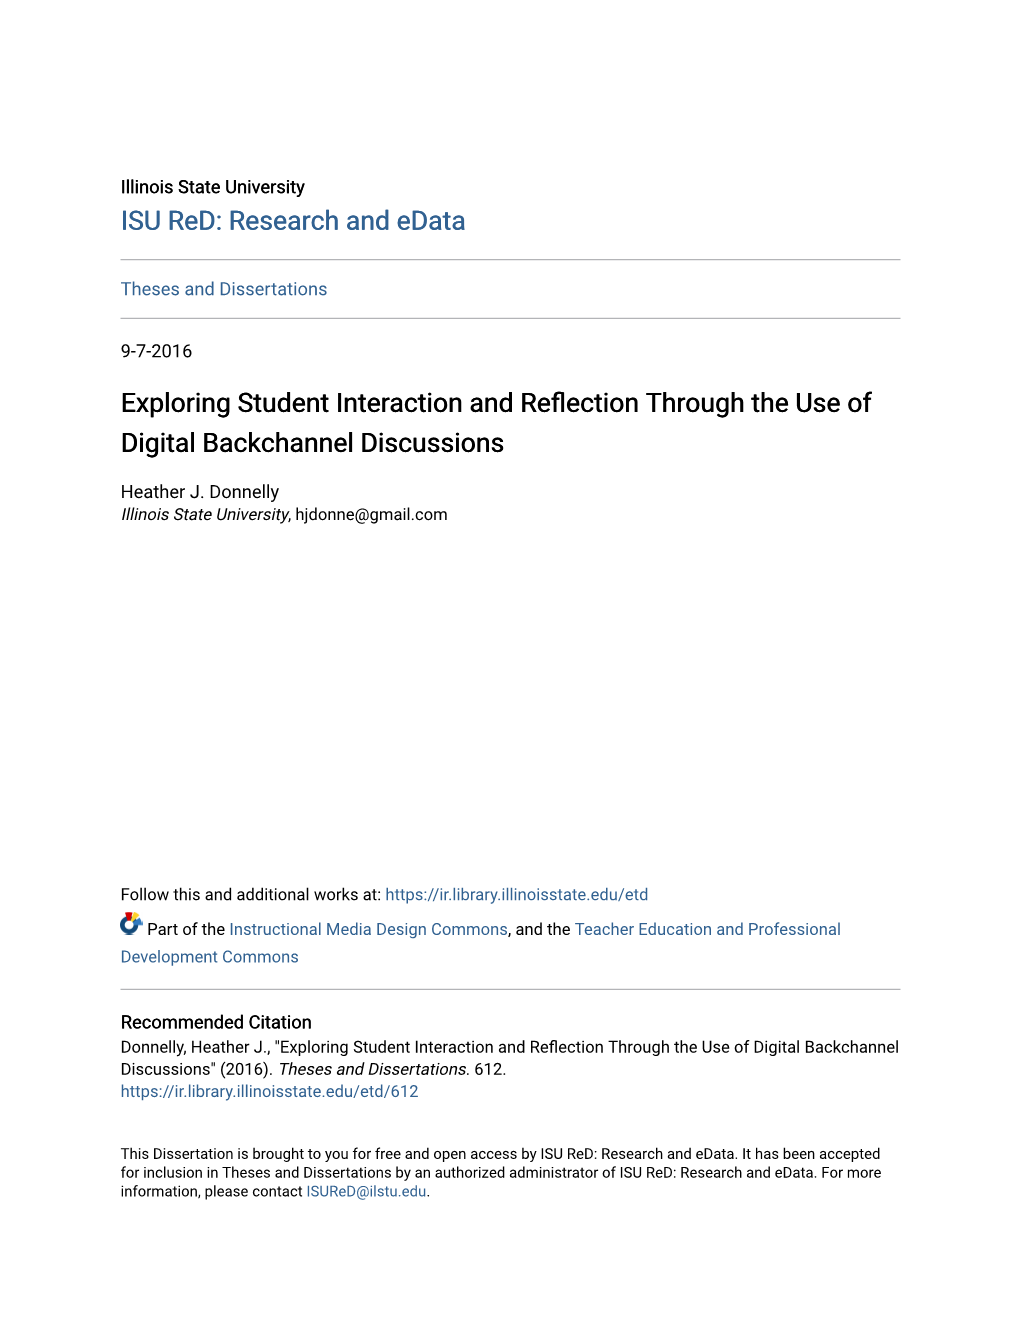 Exploring Student Interaction and Reflection Through the Use of Digital Backchannel Discussions